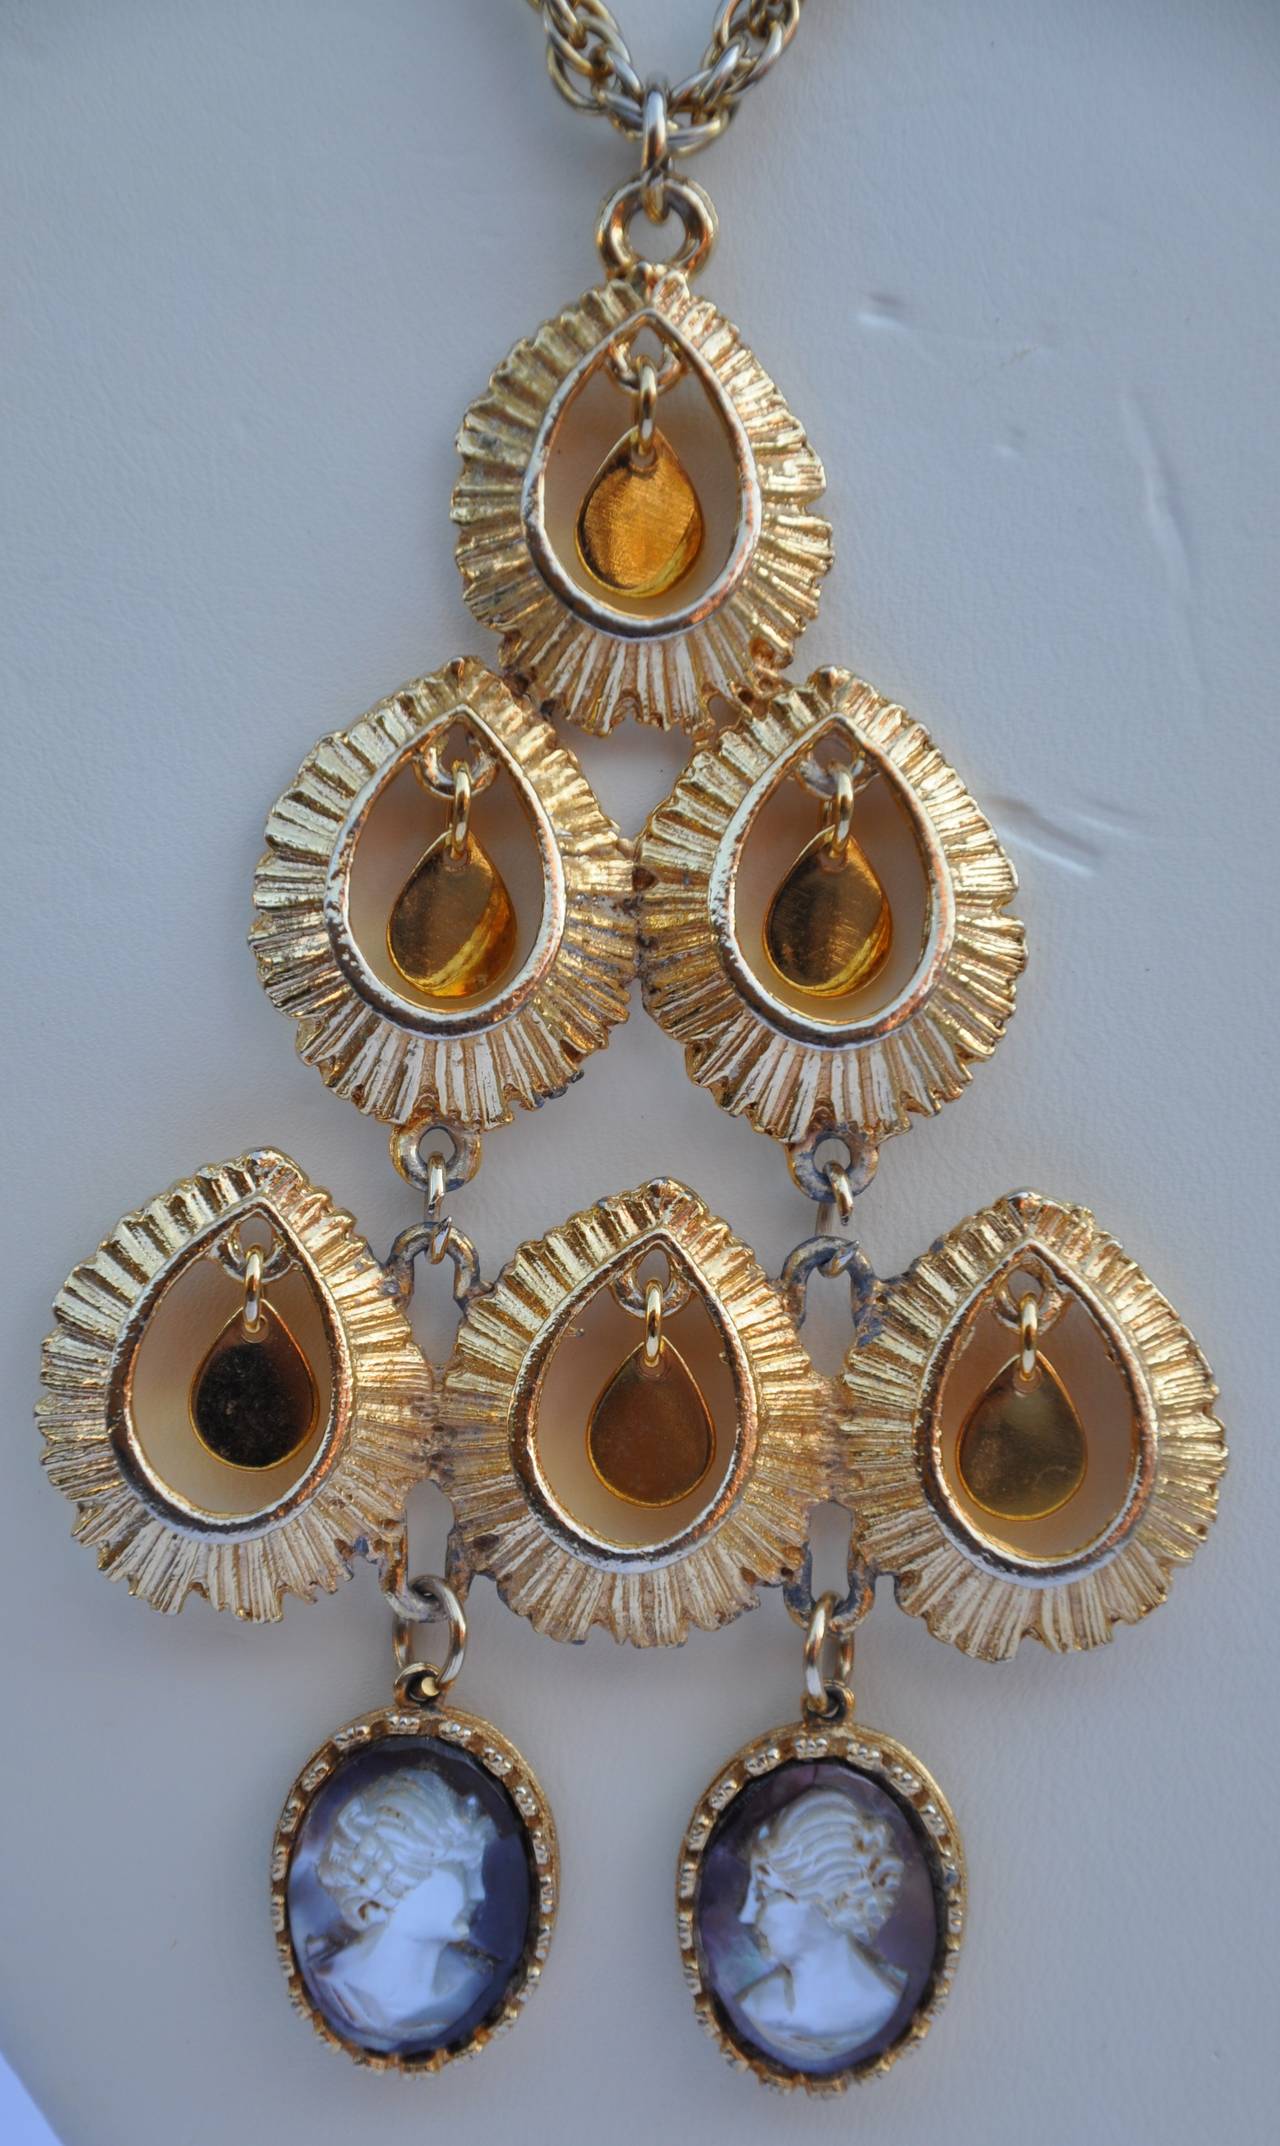        This huge delightful mobile pendant with necklace features two mother-of-pearl cameos dangling under multiple small gold pedals. The huge pendant measures 4